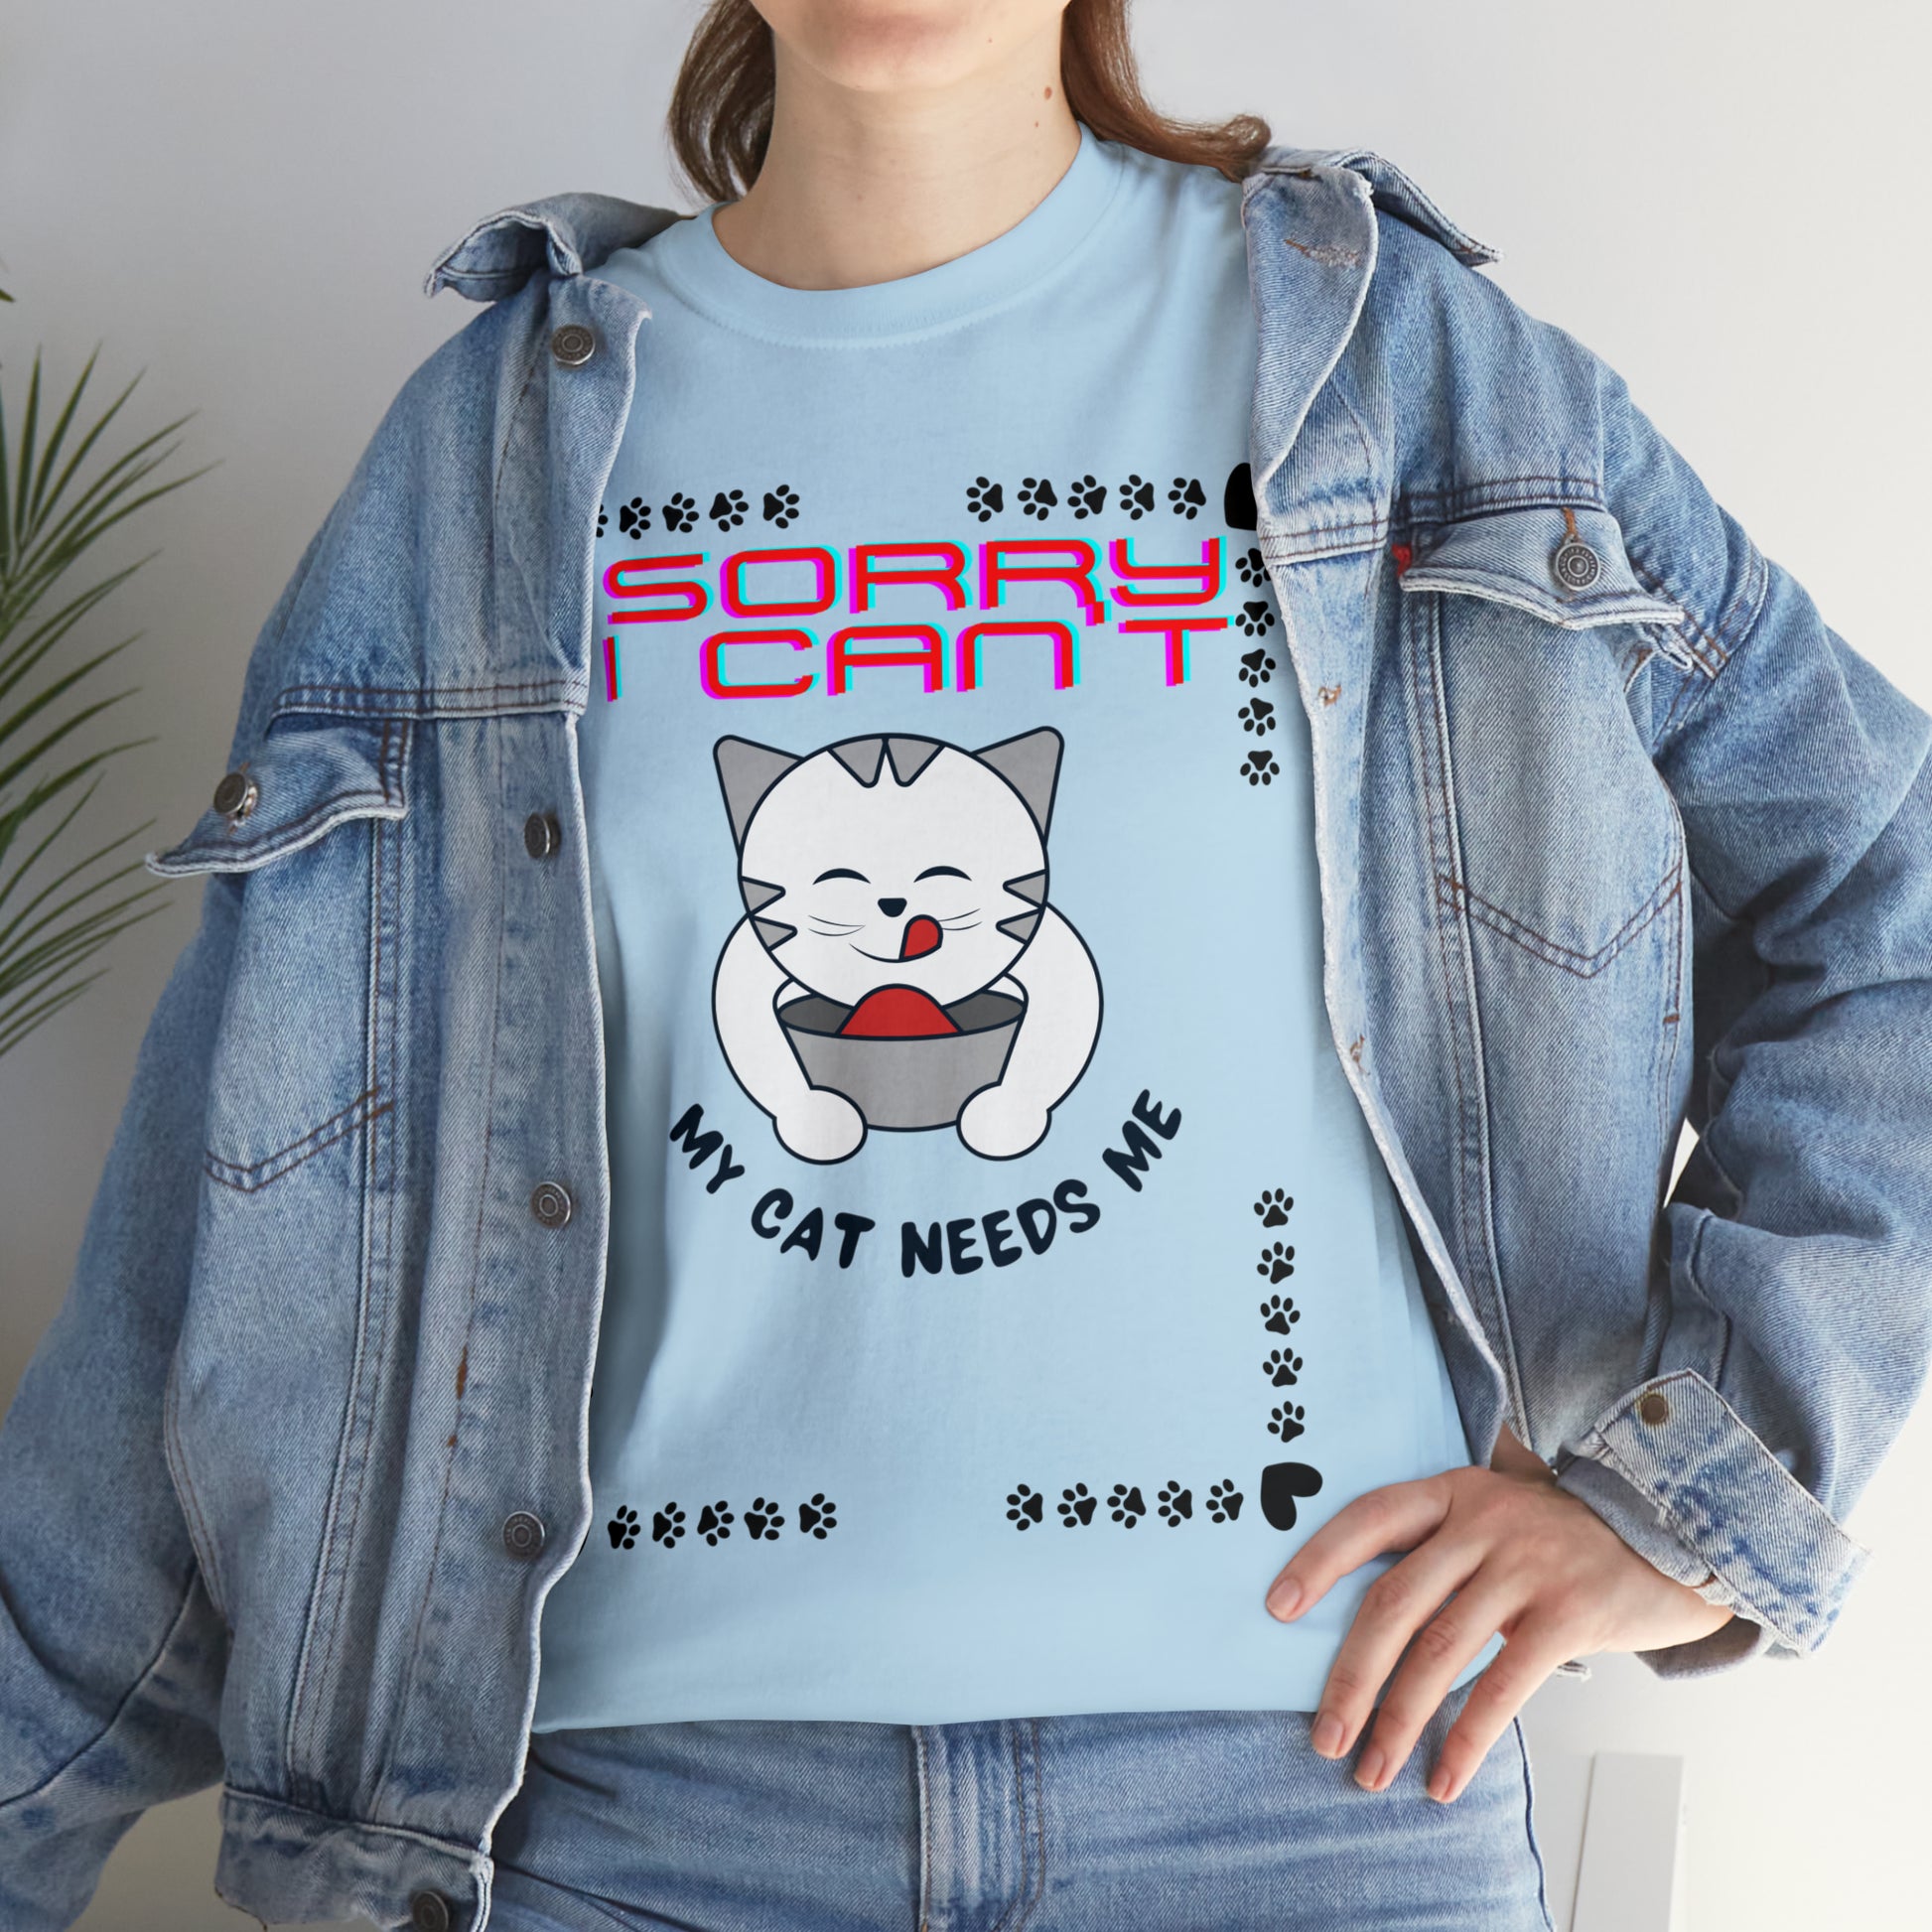 Sorry I Can't My Cat Needs Me T-Shirt | Cat Mom Shirt | Cat Lover Gift | Cat Mom Gift | Animal Lover Gift for Women T-Shirt Light Blue S 